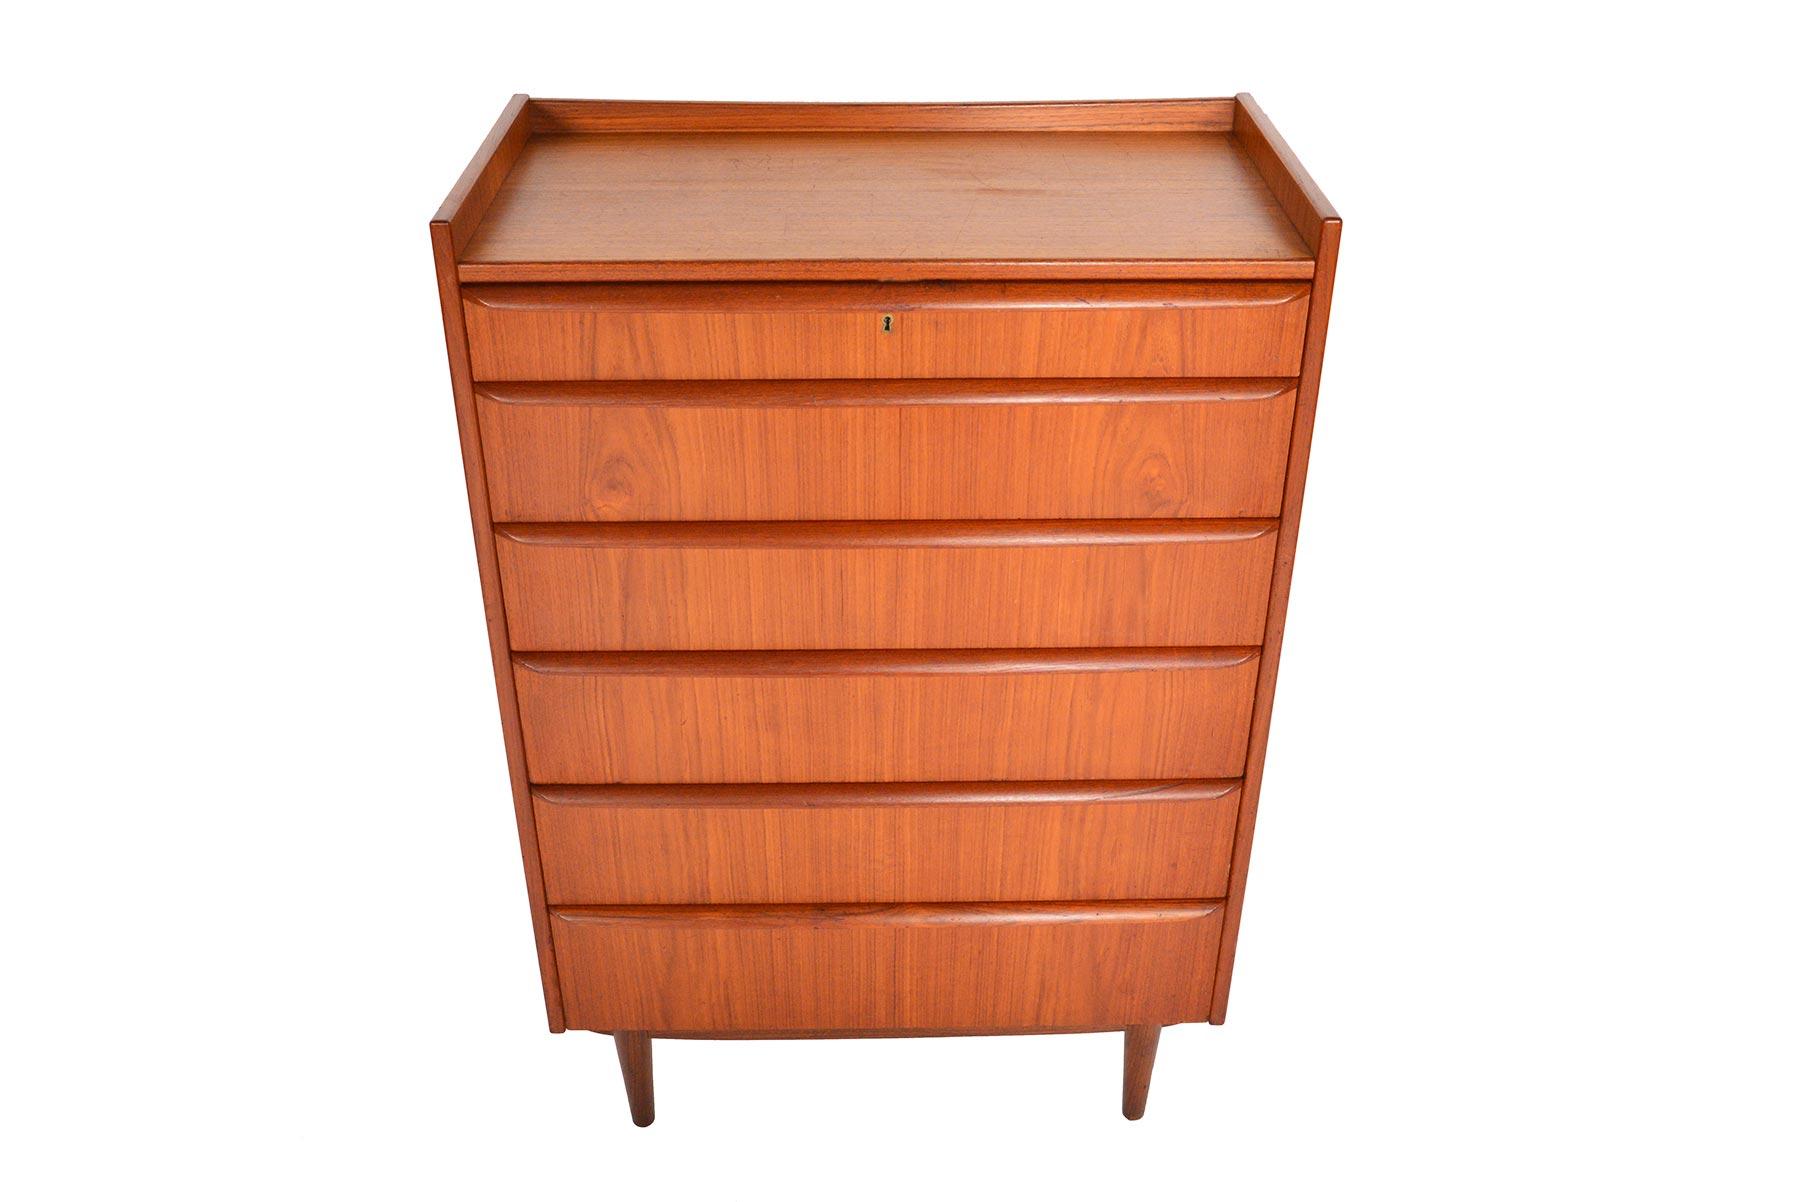 This gorgeous Danish modern six-drawer midcentury teak highboy dresser offers a stunning profile. Drawers become progressively deeper towards the base. Banded in beautifully contrasting afrormosia, each drawer features a full profile pull. A